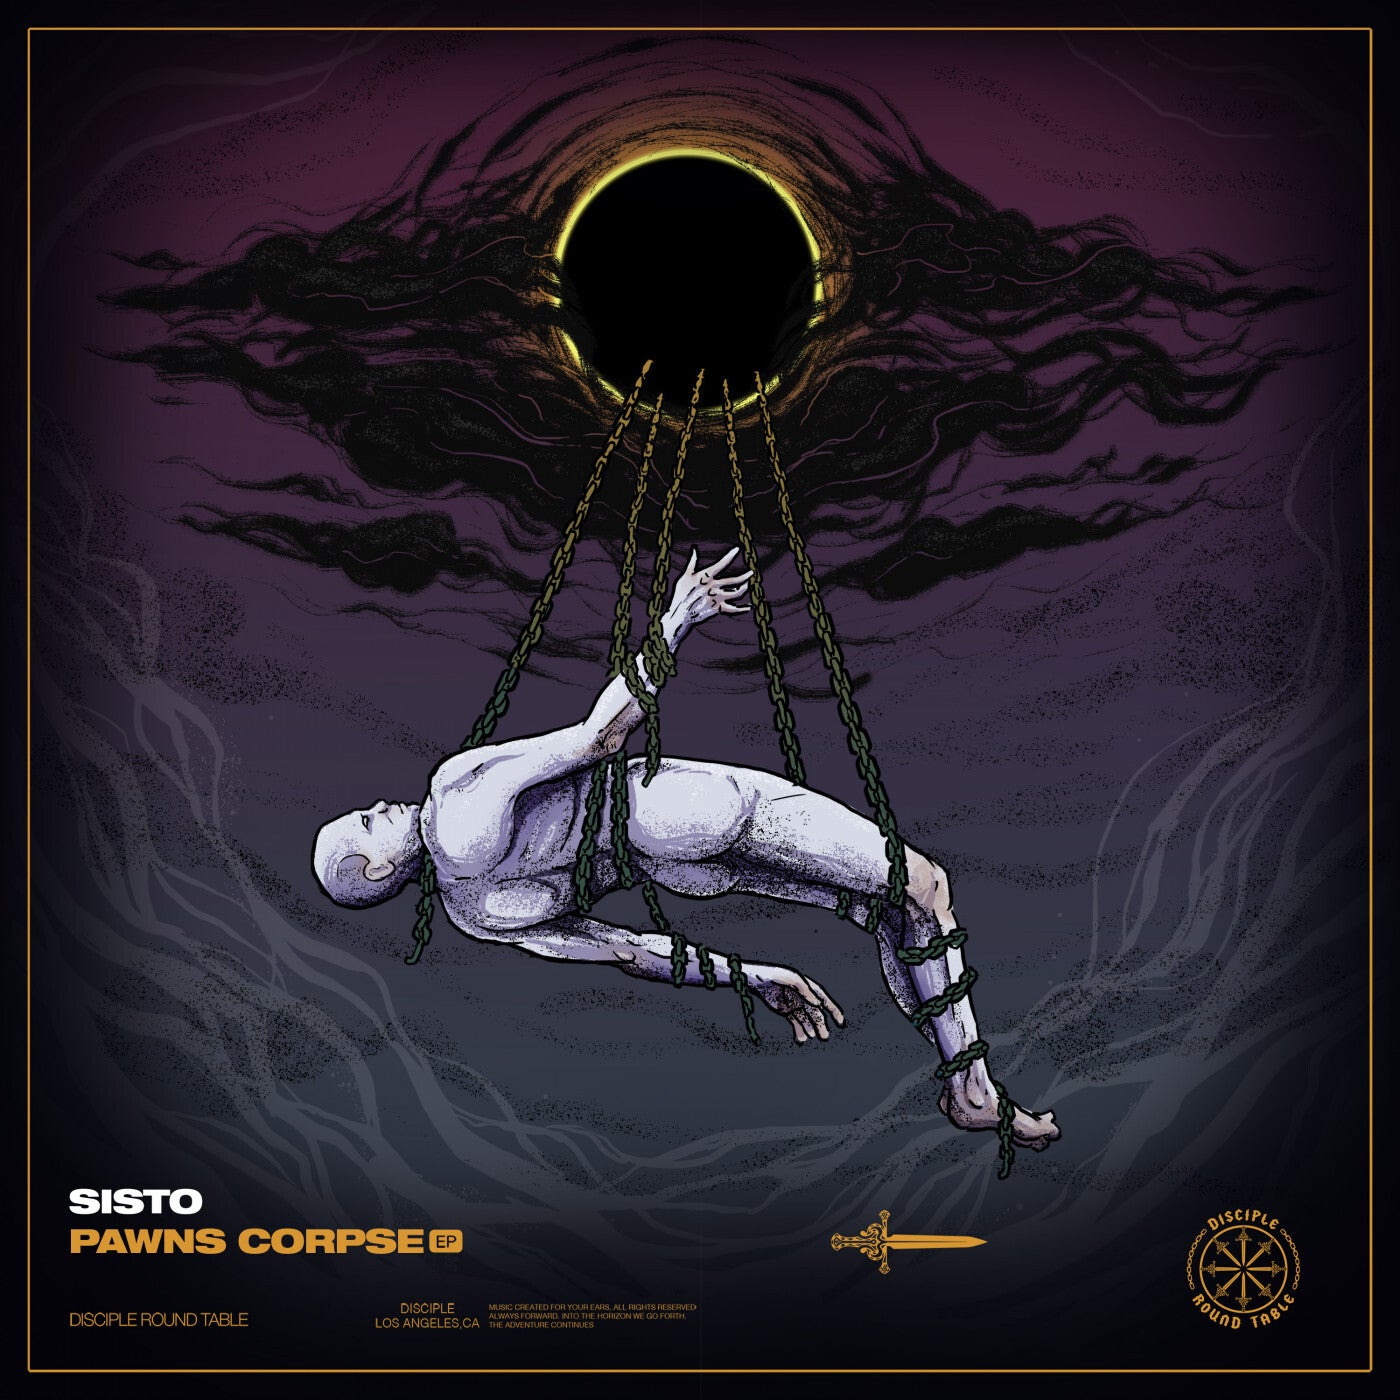 Pawns Corpse EP